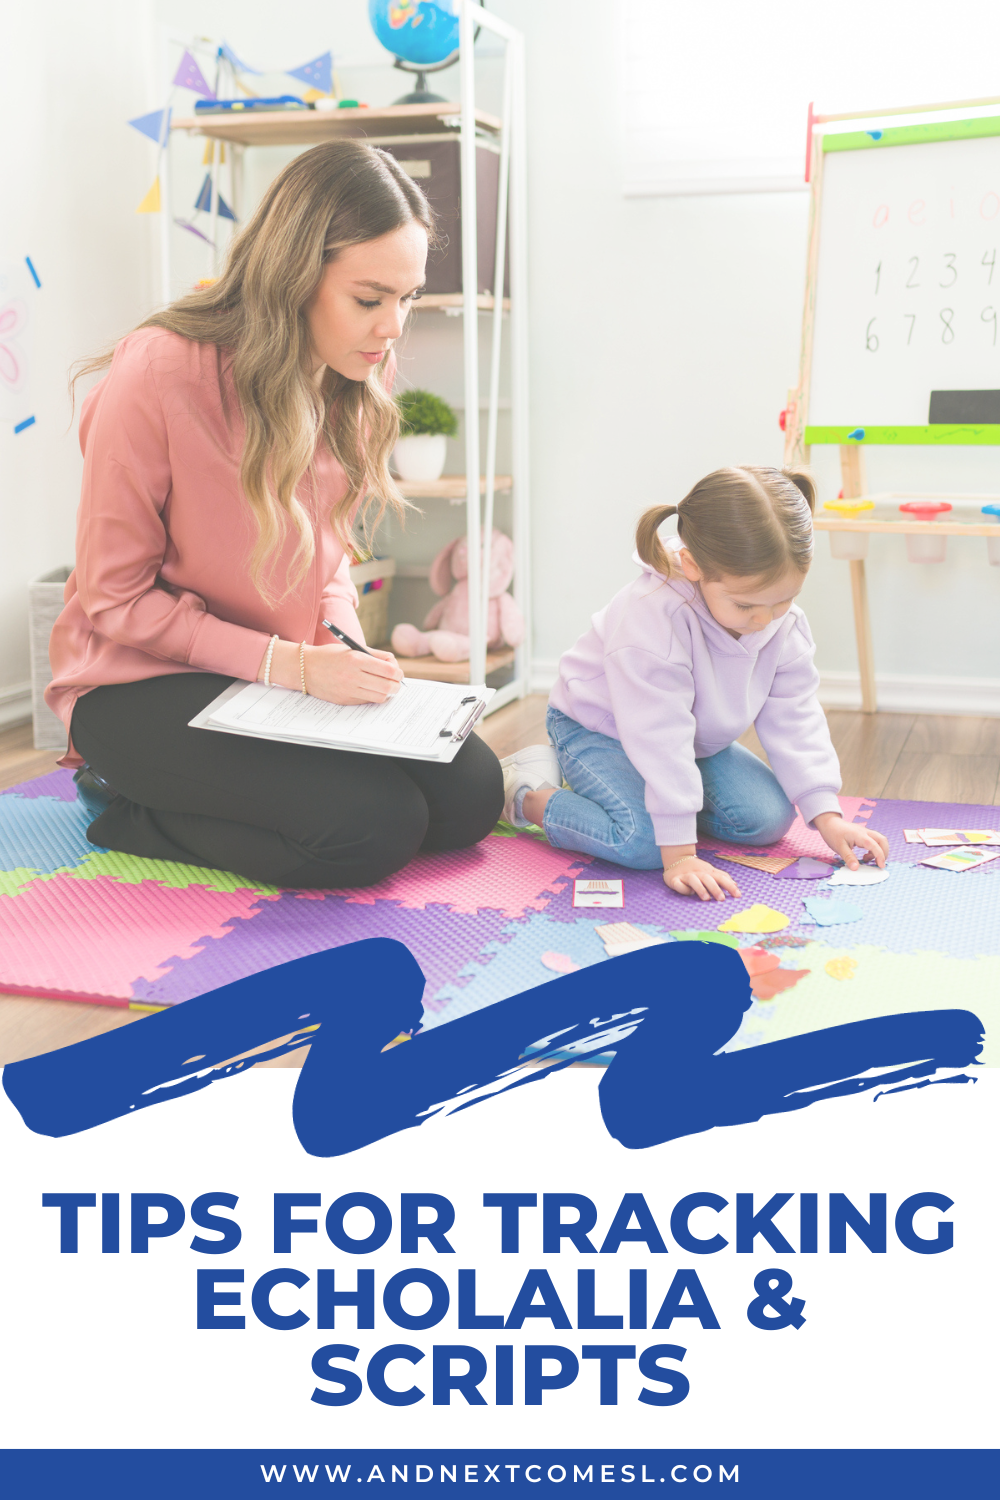 Tips for tracking echolalia and scripting in gestalt language processors, hyperlexic children, and autistic children